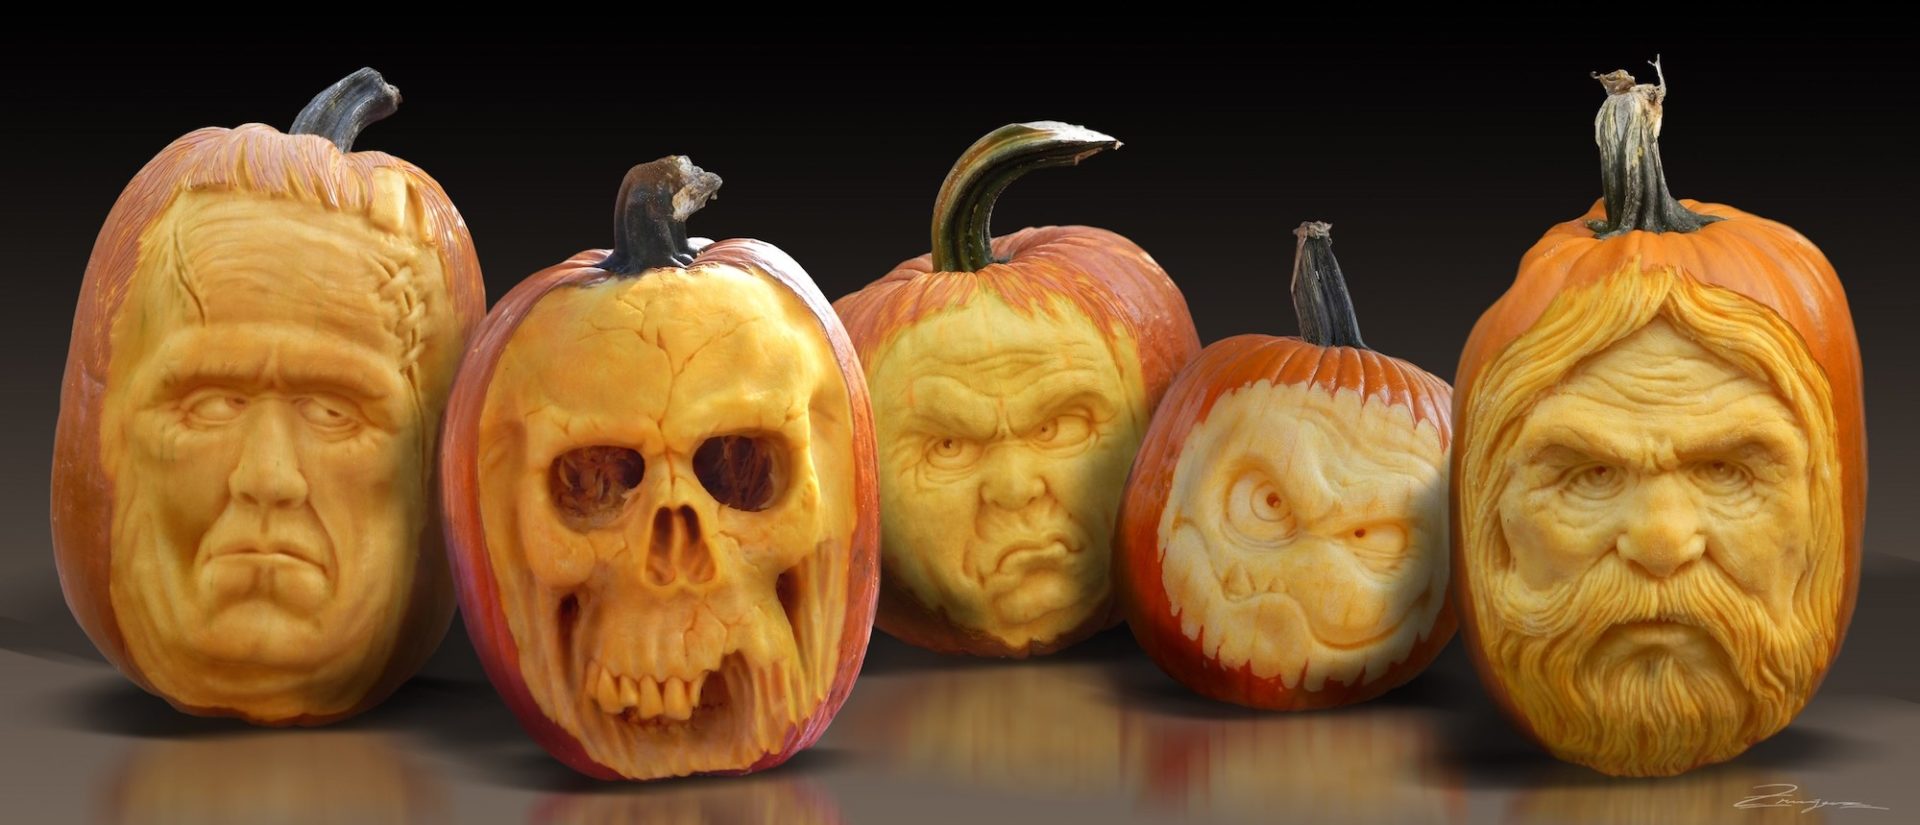 Five elaborately carved pumpkins featuring frankenstein, a skull, and angry scary faces